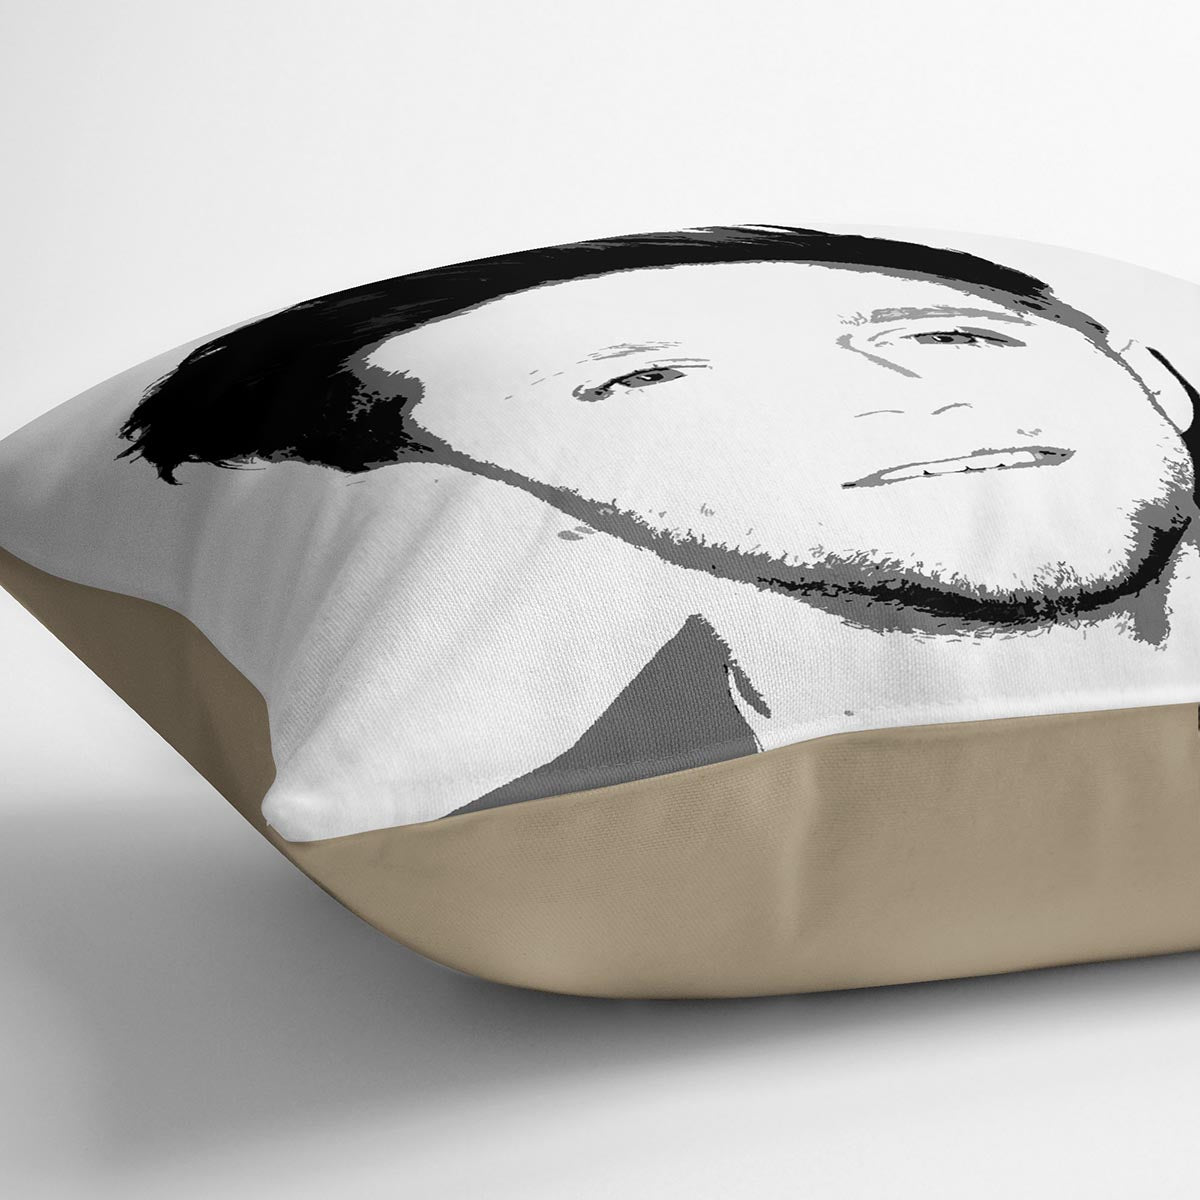 Niall Horan of One Direction Black and White Pop Art Cushion